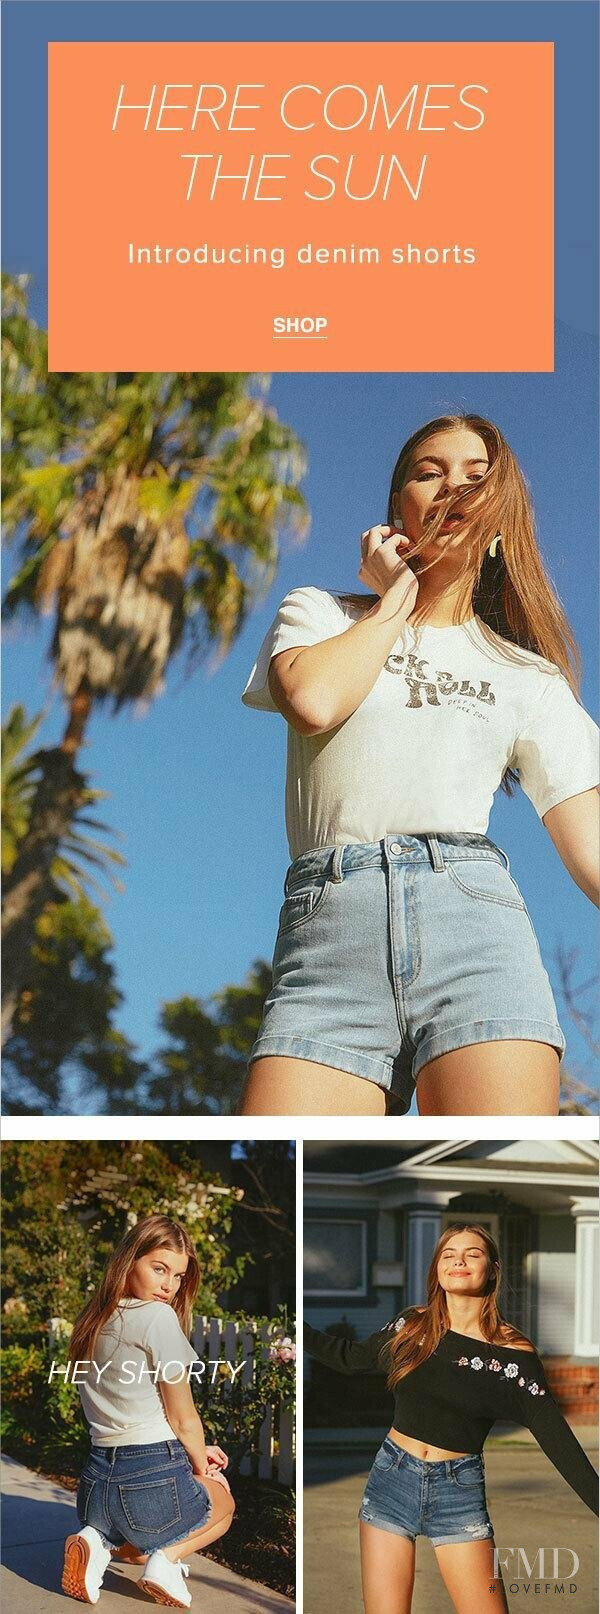 Kate Li featured in  the PacSun advertisement for Winter 2018